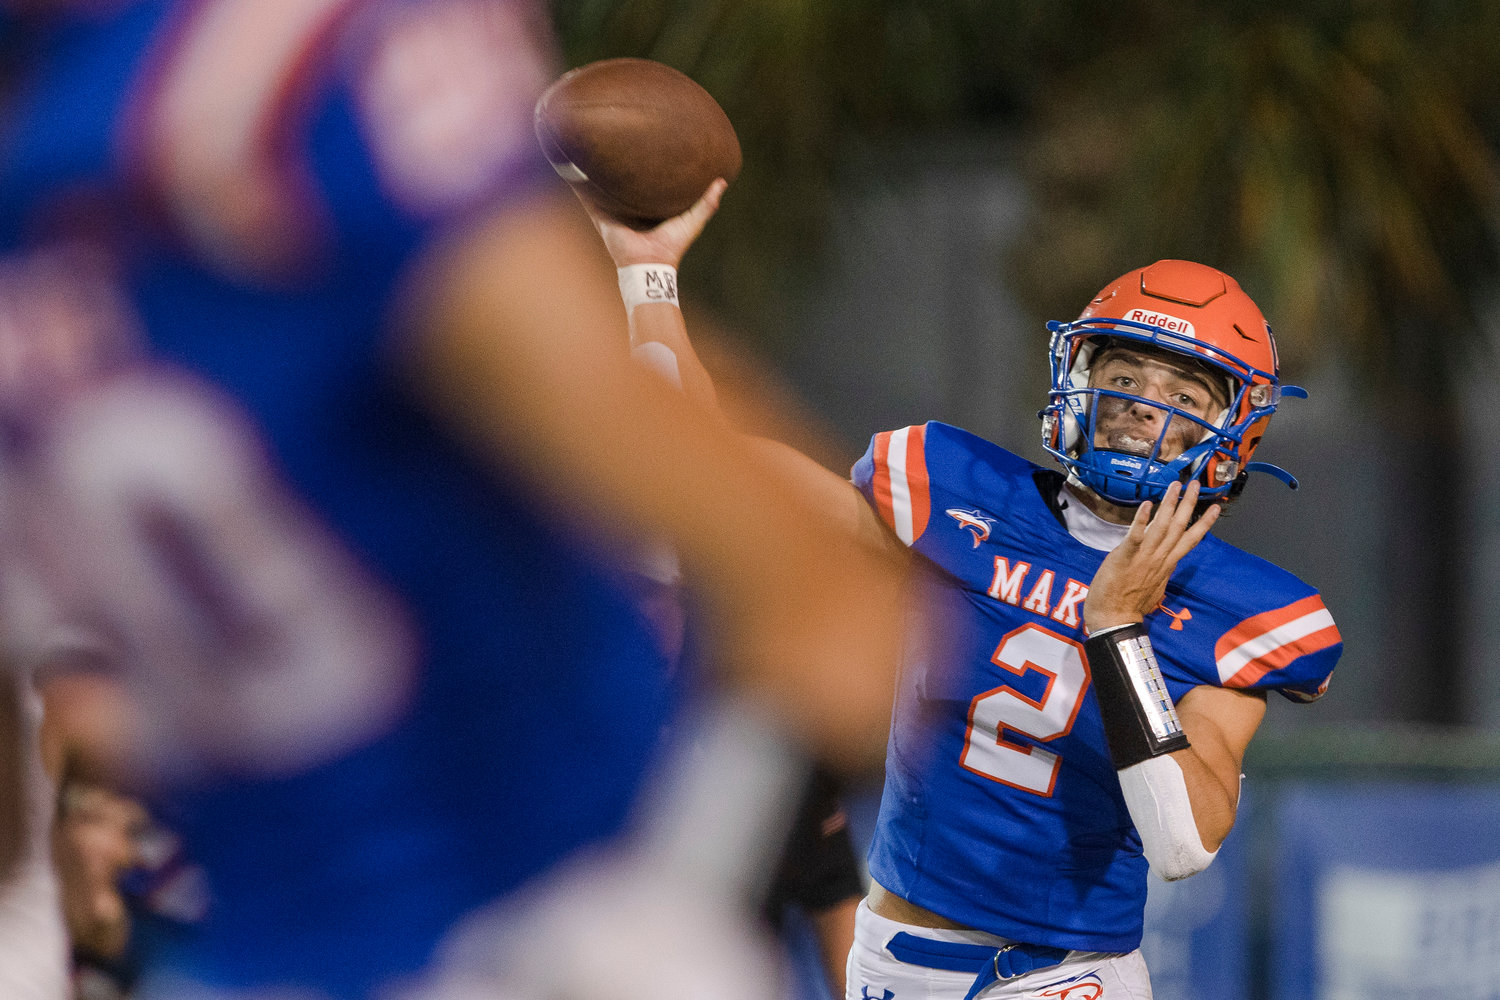 Orange Beach quarterback Cash Turner fires a throw during the Makos' first region game of the season at home against Jackson Friday night. Turner's late passing touchdown helped the hosts open region with a 31-14 win.